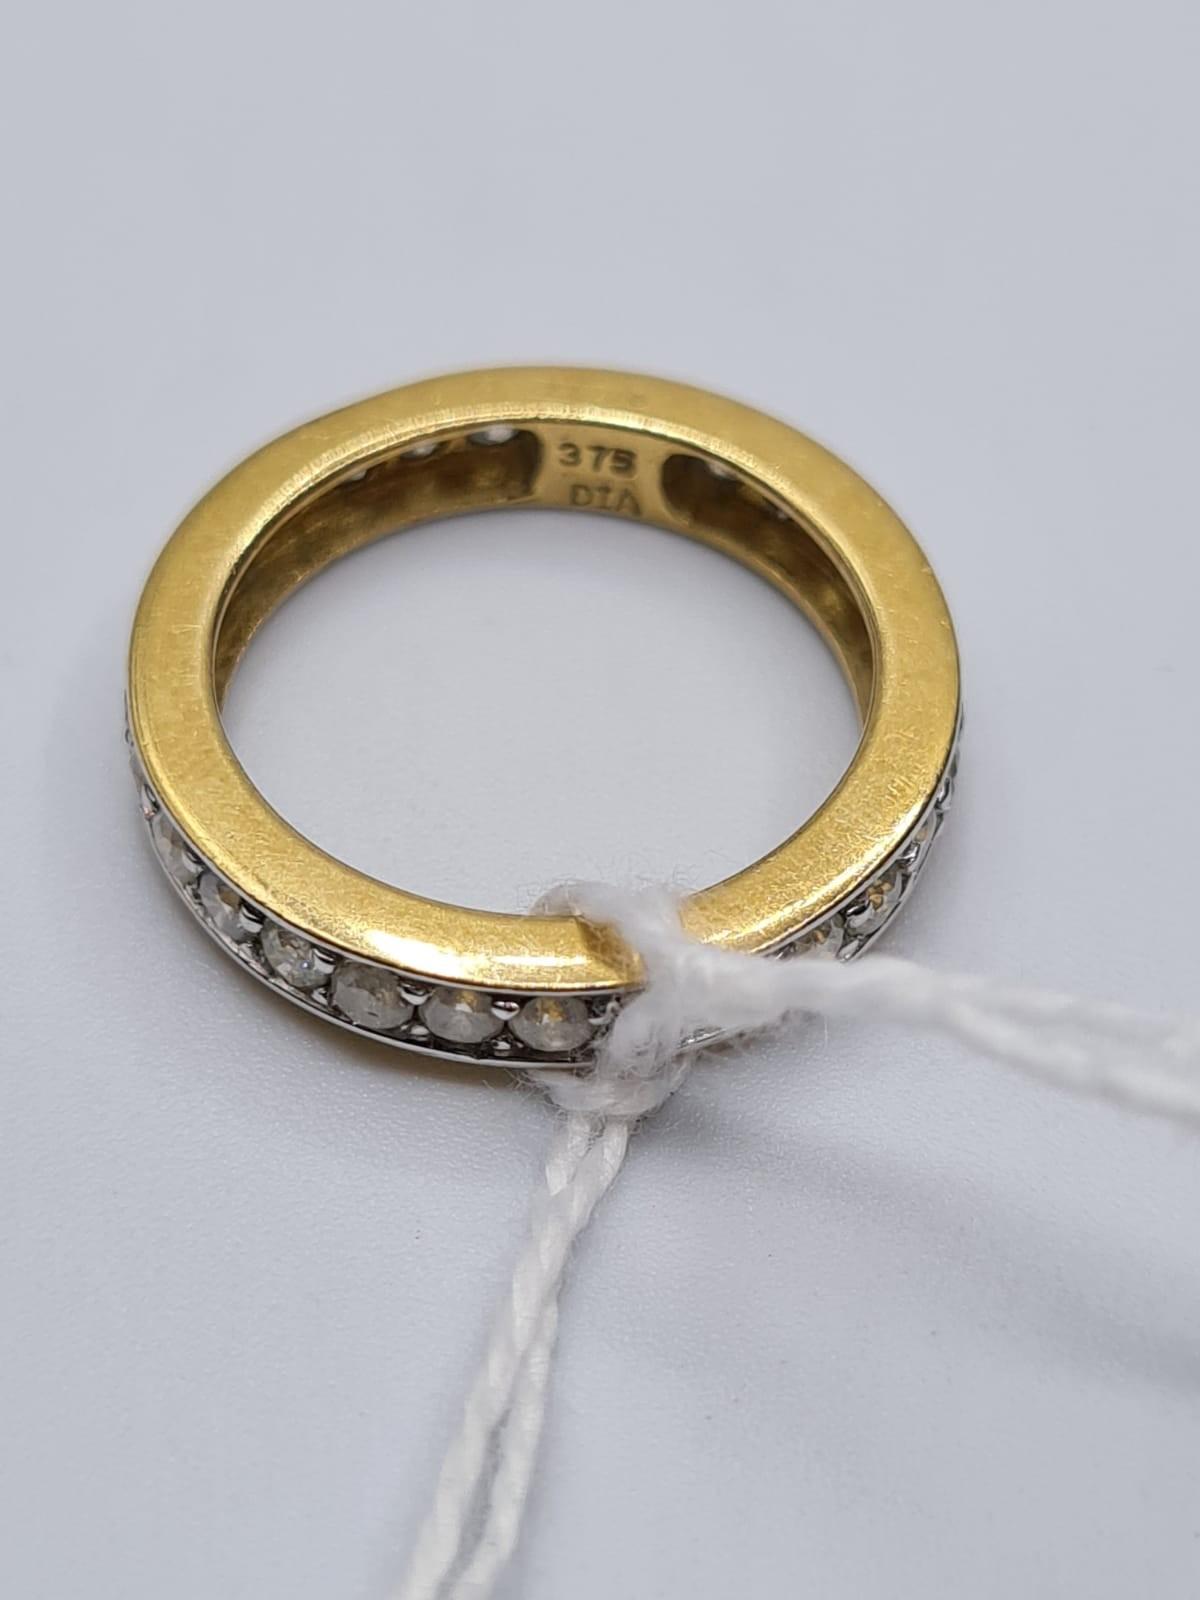 9ct Gold Full Eternity Ring With Small Diamonds 2g Size K - Image 3 of 4